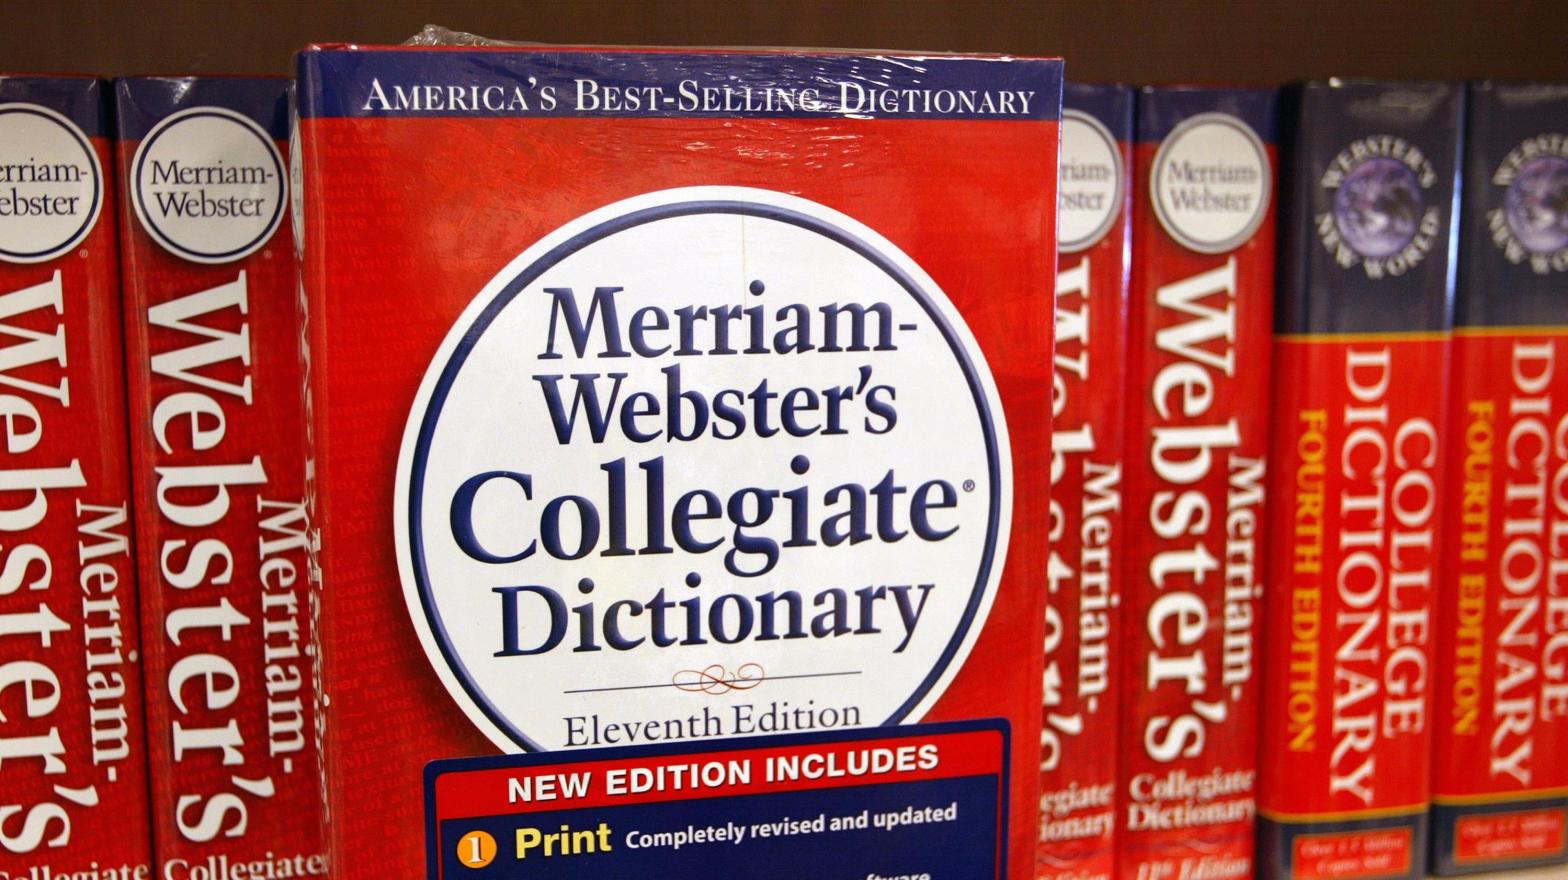 A California man is accused is making online threats against Merriam-Webster. He will appear in court on Friday. (Photo: Tim Boyle, Getty Images)